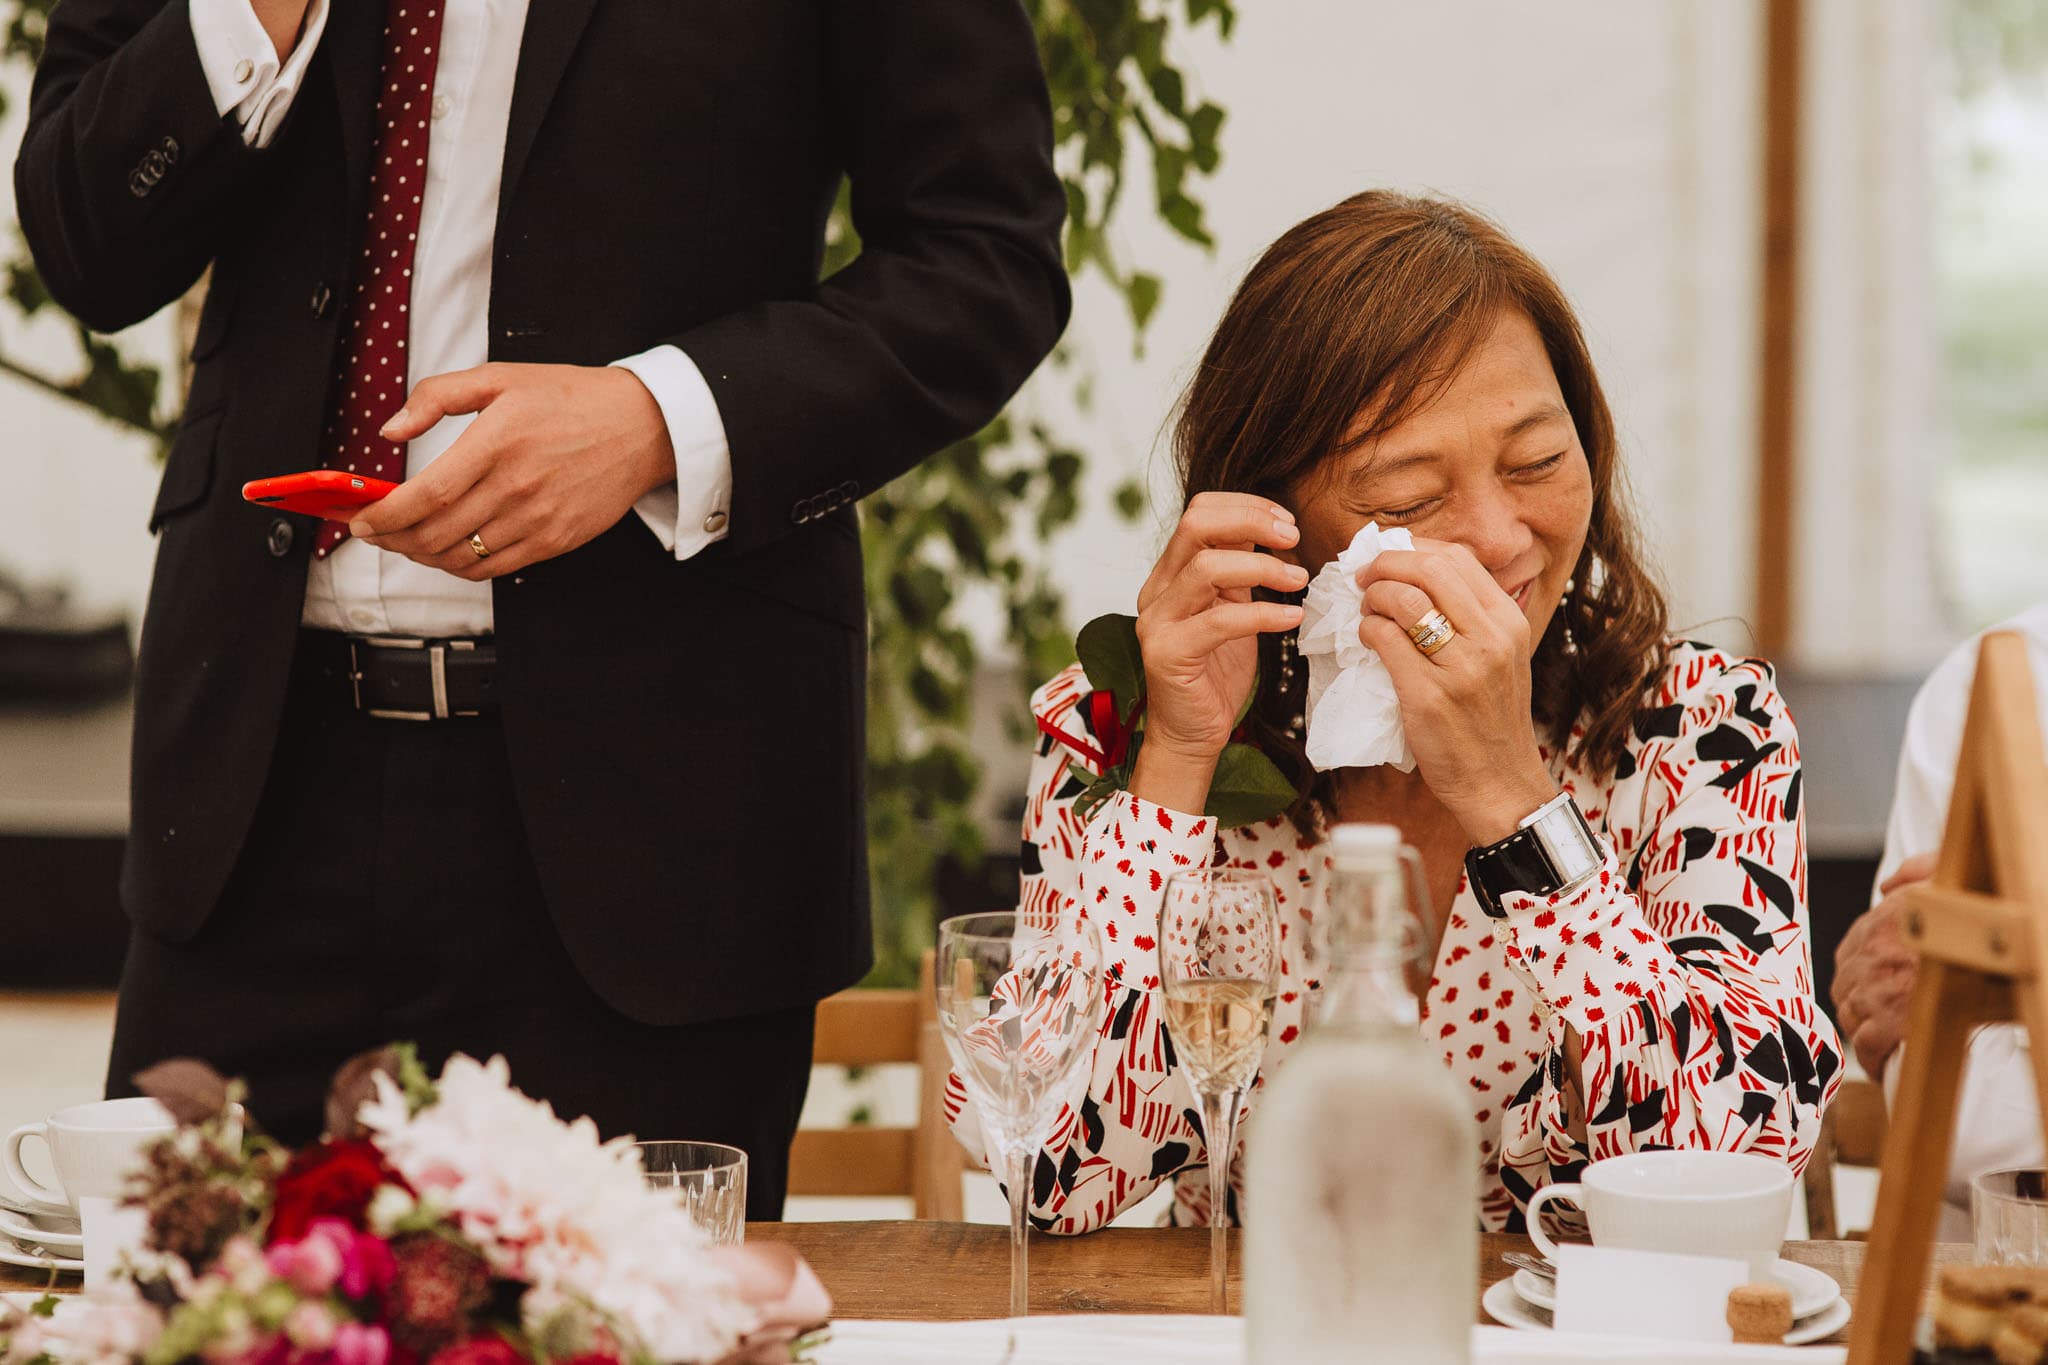 mother of the groom wiping a tear during his speech